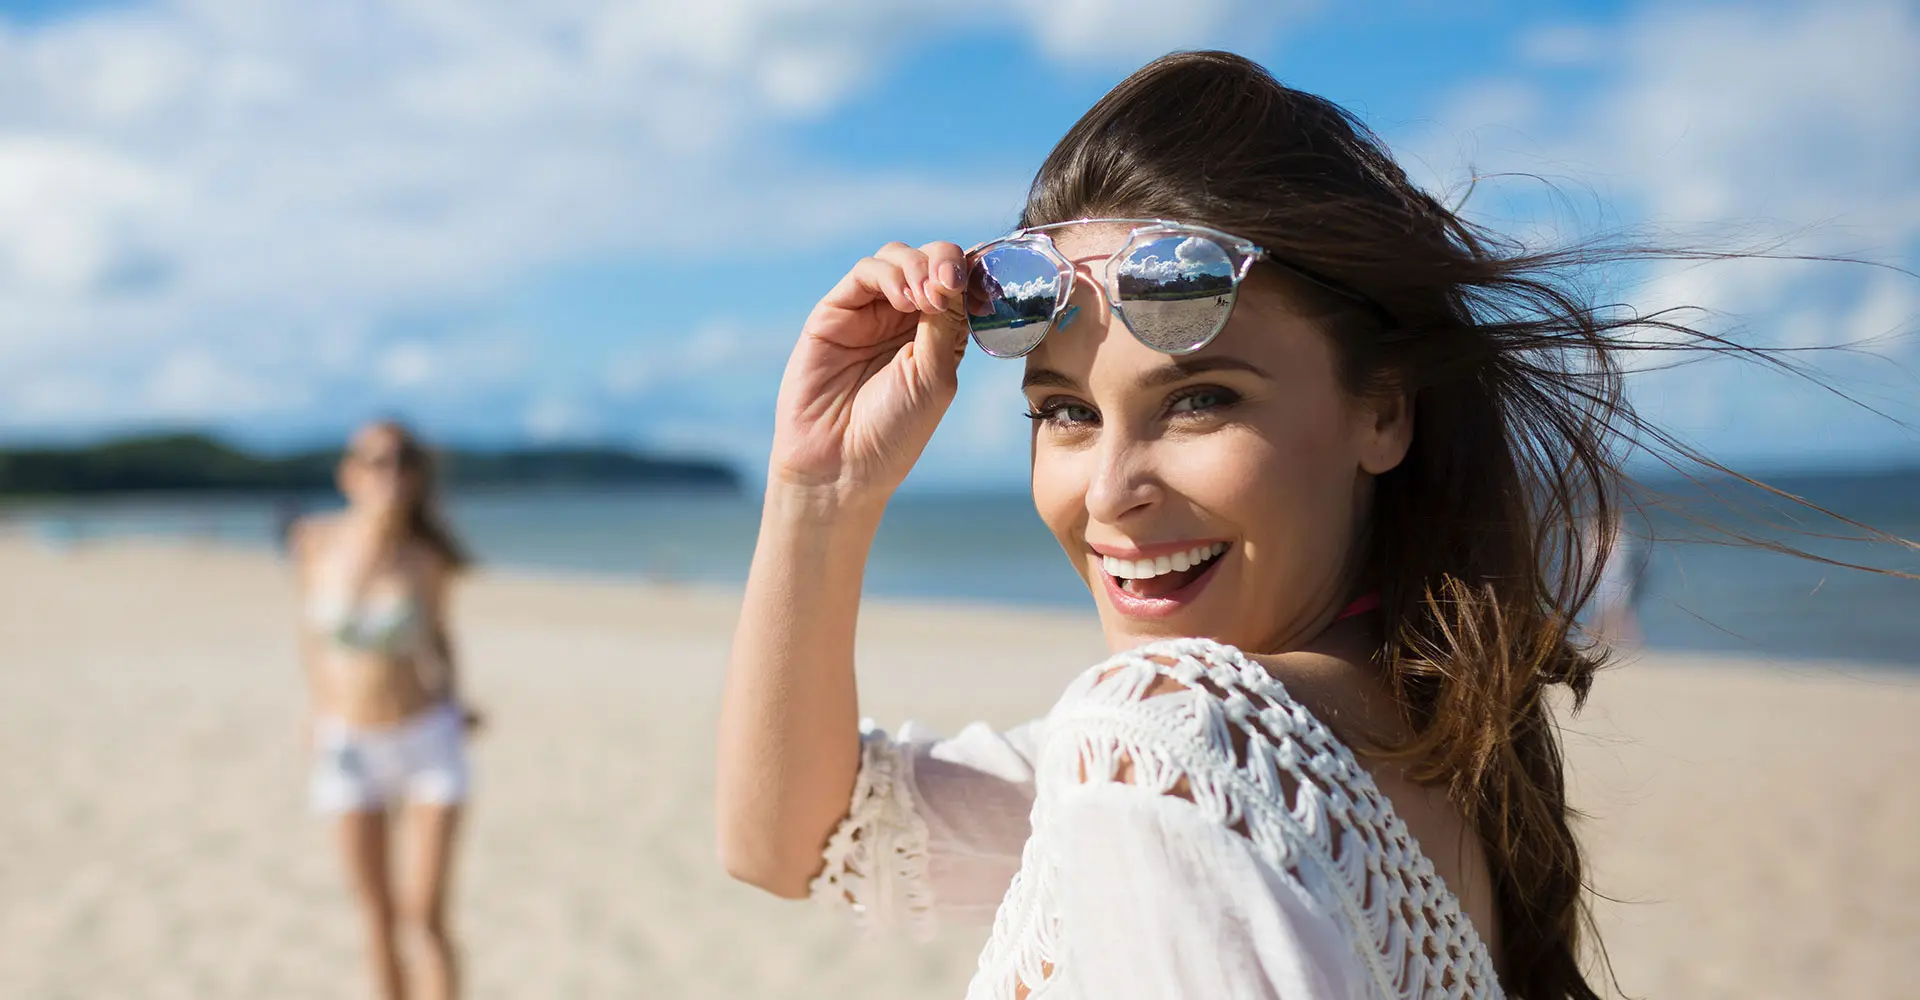 A woman wearing sunglasses on the beach.